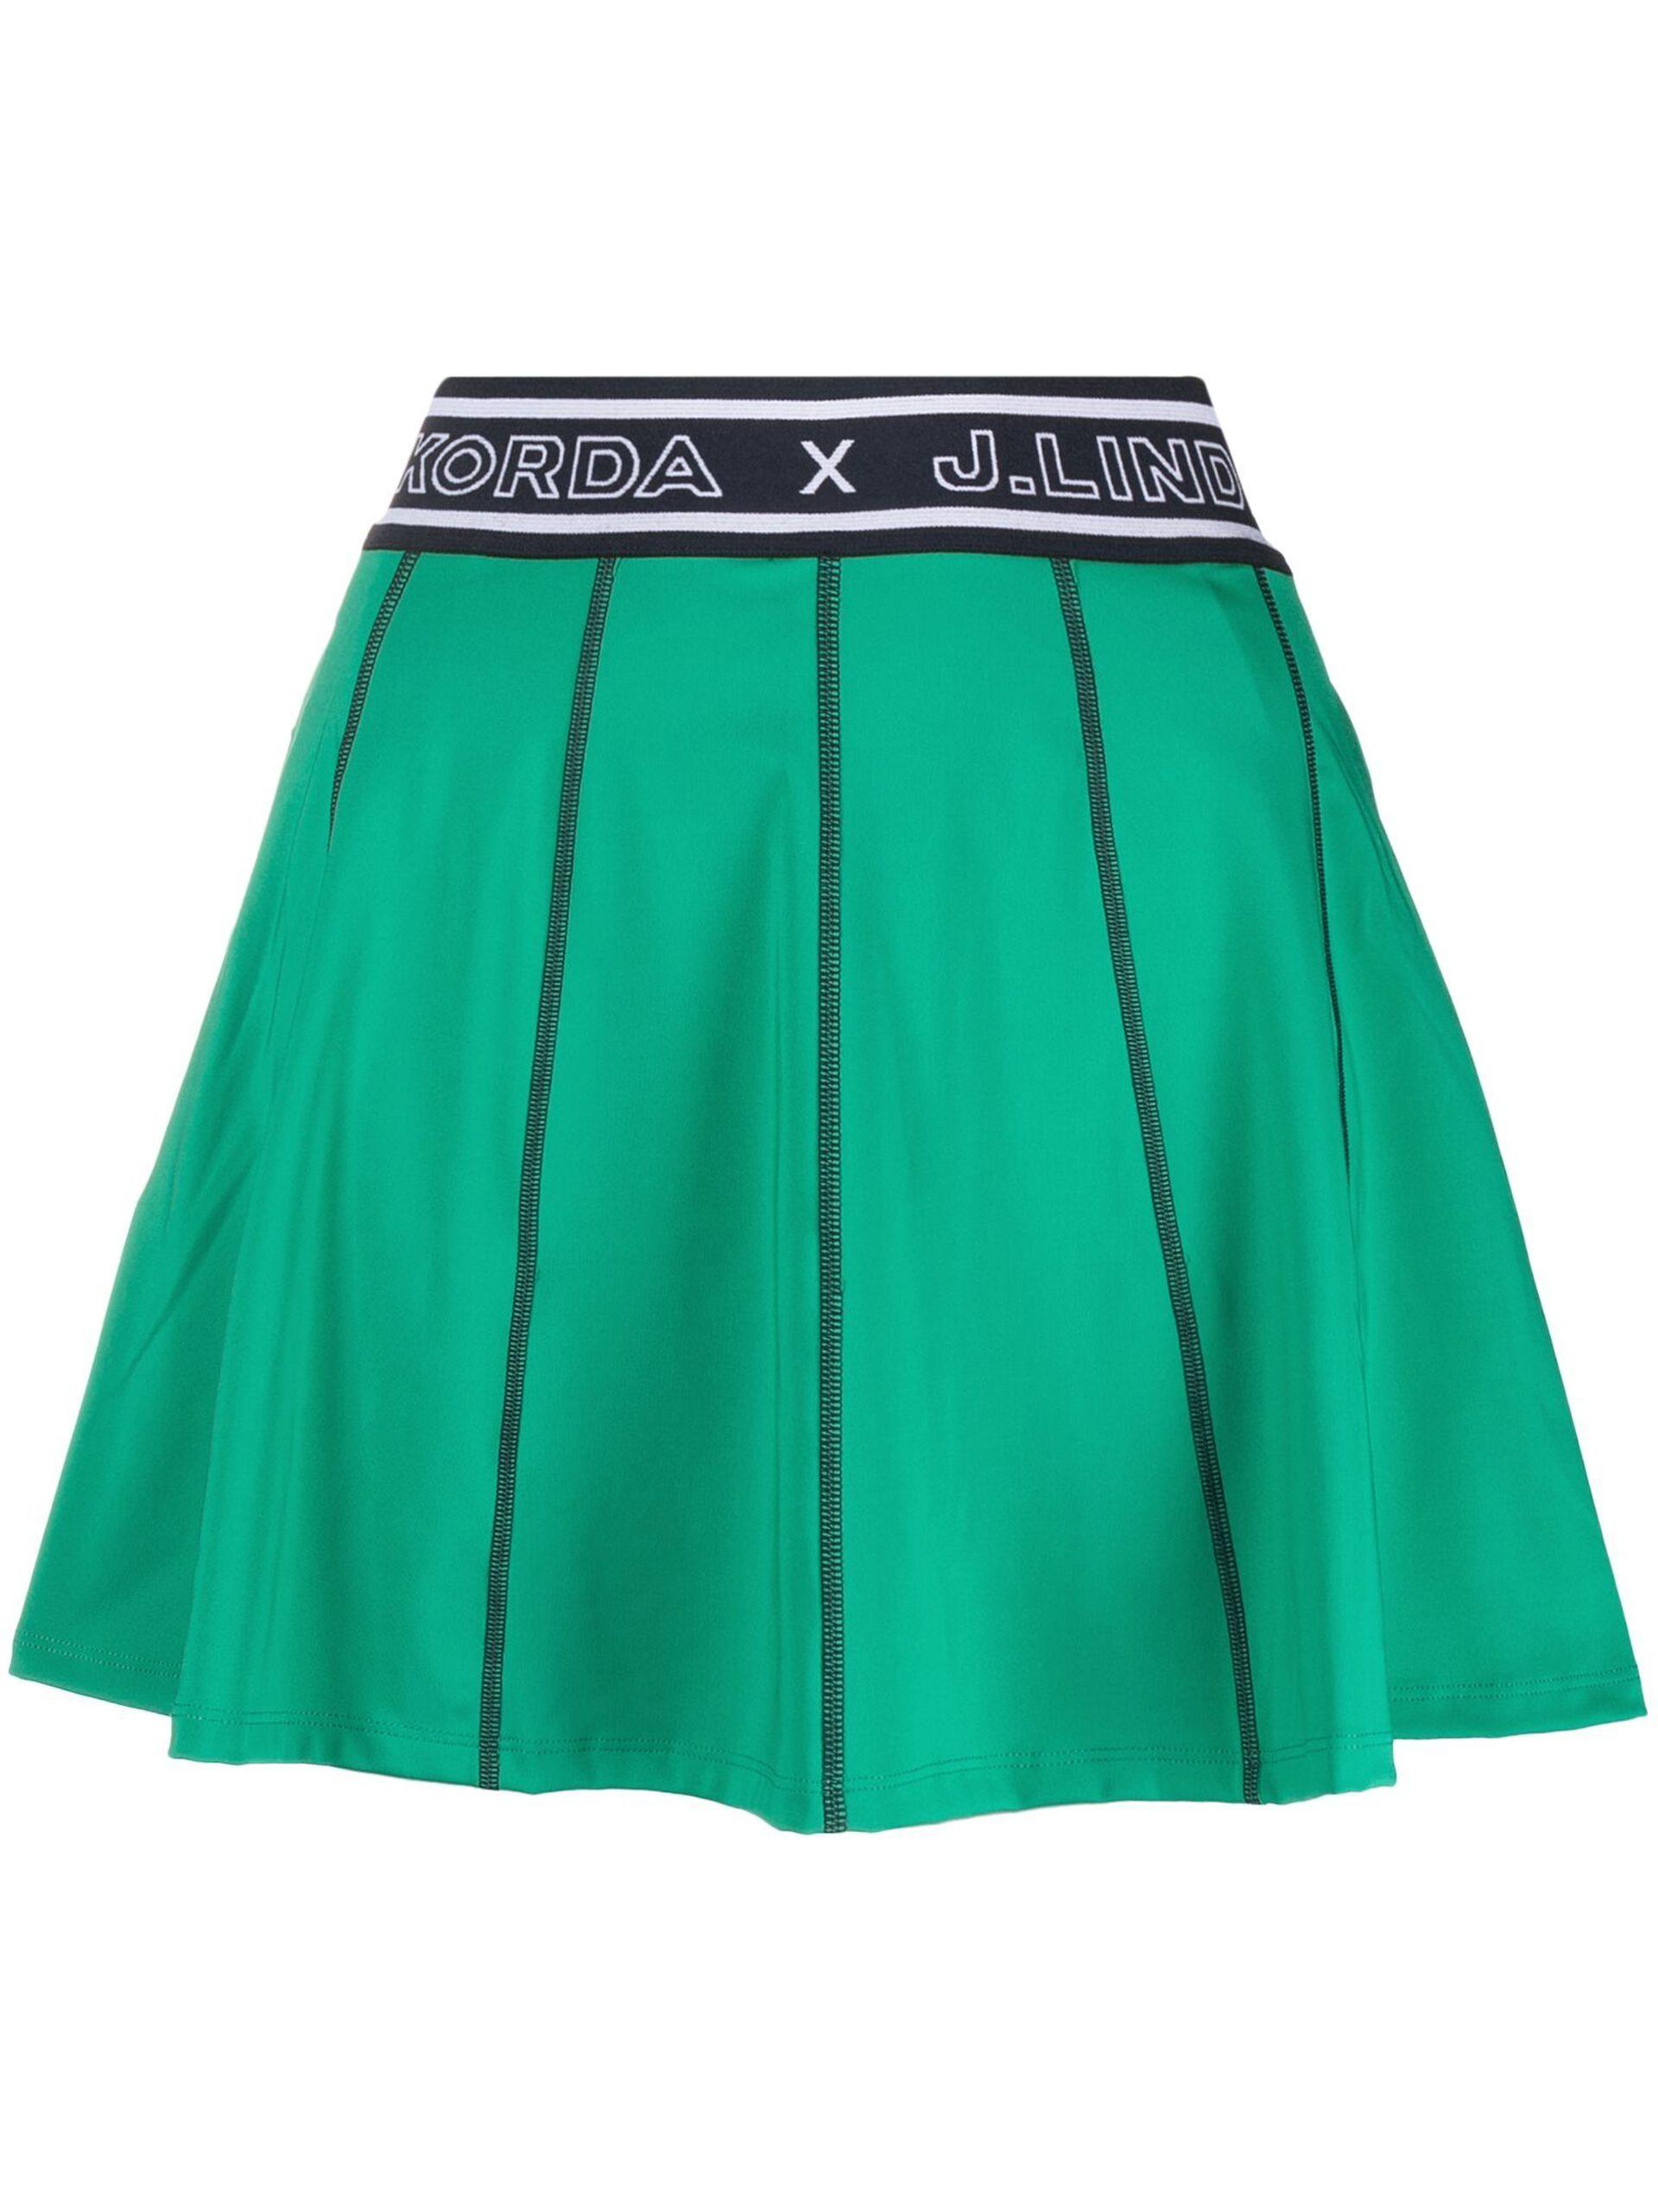 J.Lindeberg X Nelly Korda Pleated Golf Skirt in Green | Lyst